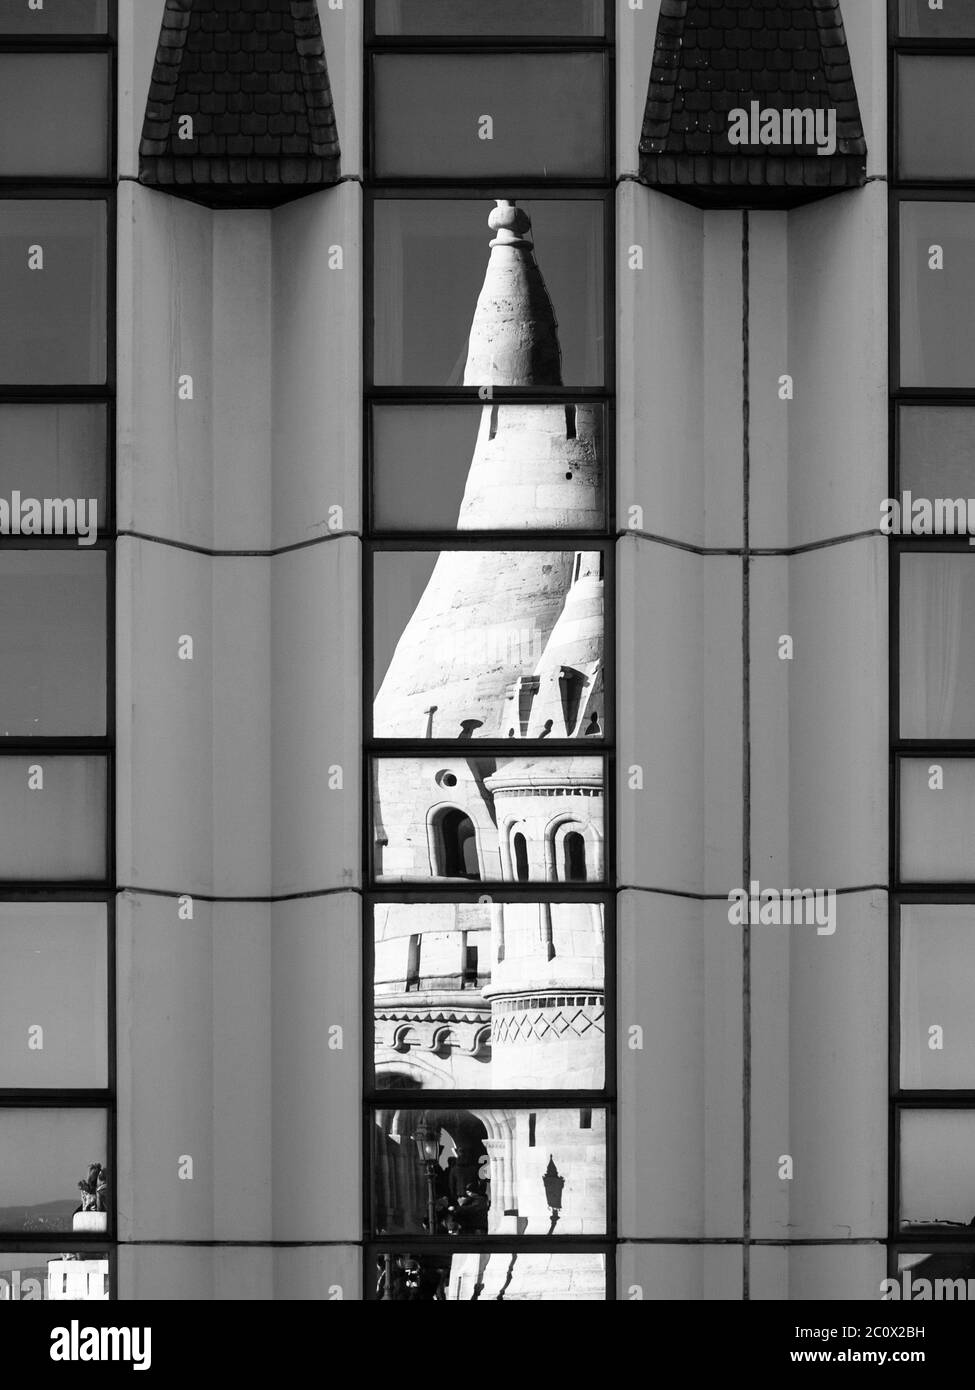 Detailed view of warped reflection of Fisherman's Bastion, aka Halaszbastya, fairy tale towers in windows of modern hotel. Architectural constrast of historical landmark and hated modern architecture of communistic Hungary. Budapest, capital city of Hungary, Europe. UNESCO World Heritage Site. Black and white image. Stock Photo